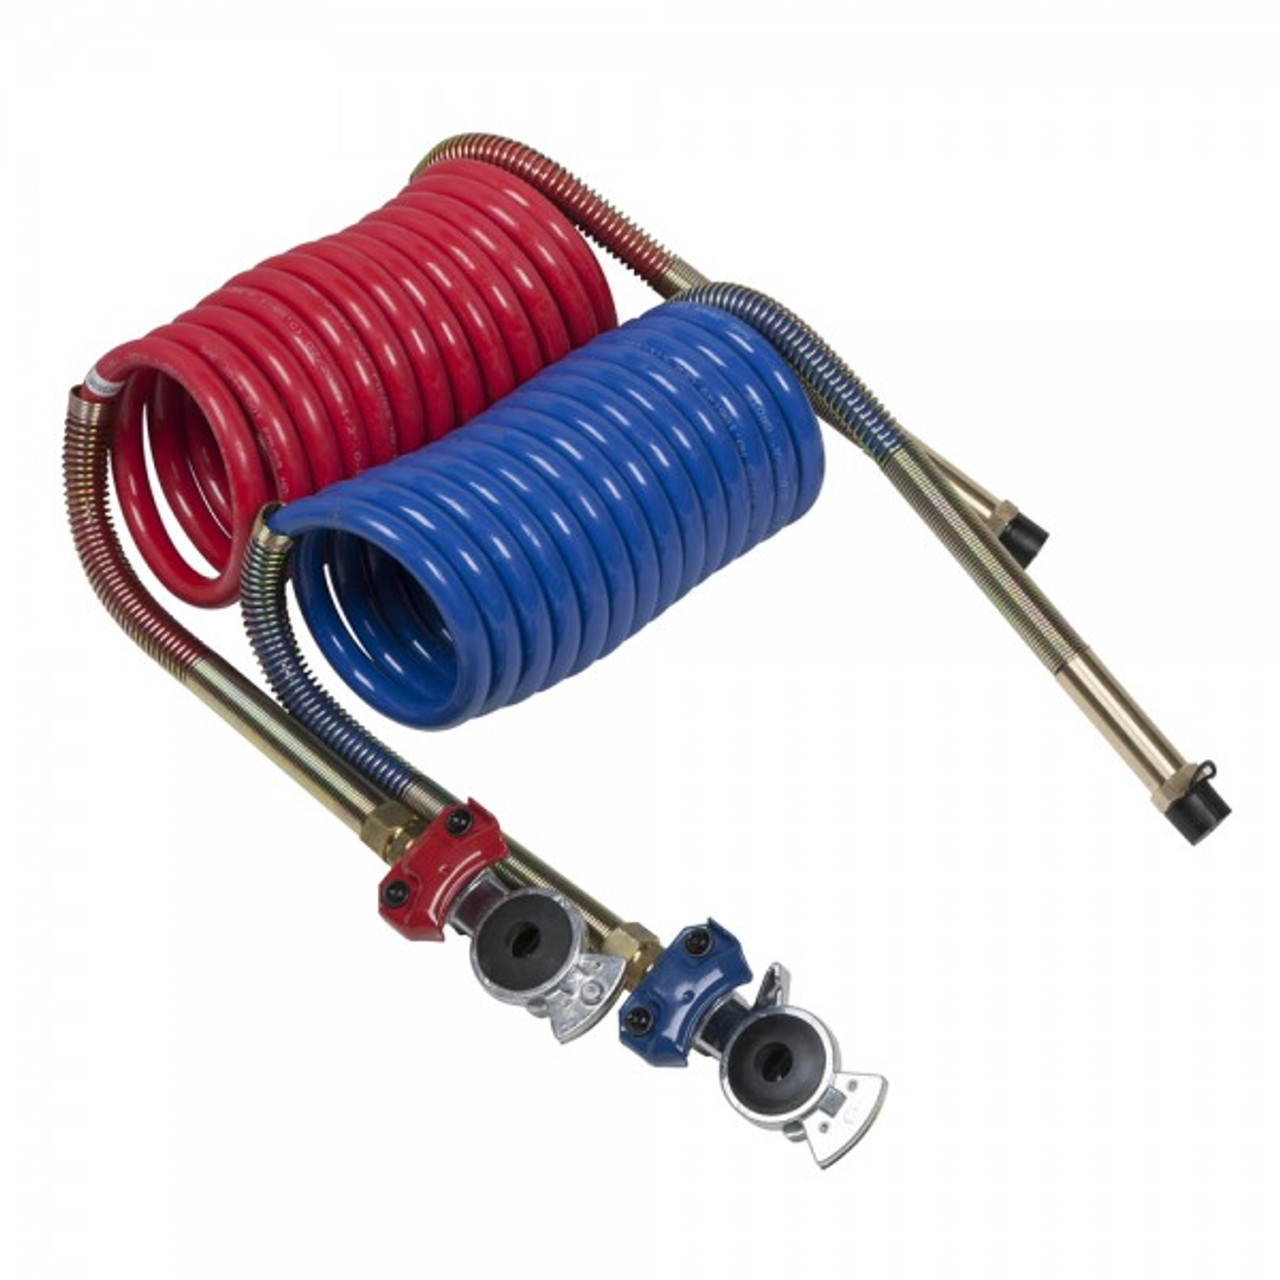 1/2" x 15' @ 2 Pack Red/Blue Low Temp Recoil Air Hose w/Red & Blue Gladhands & Male NPT Fittings  81-0015-CGH